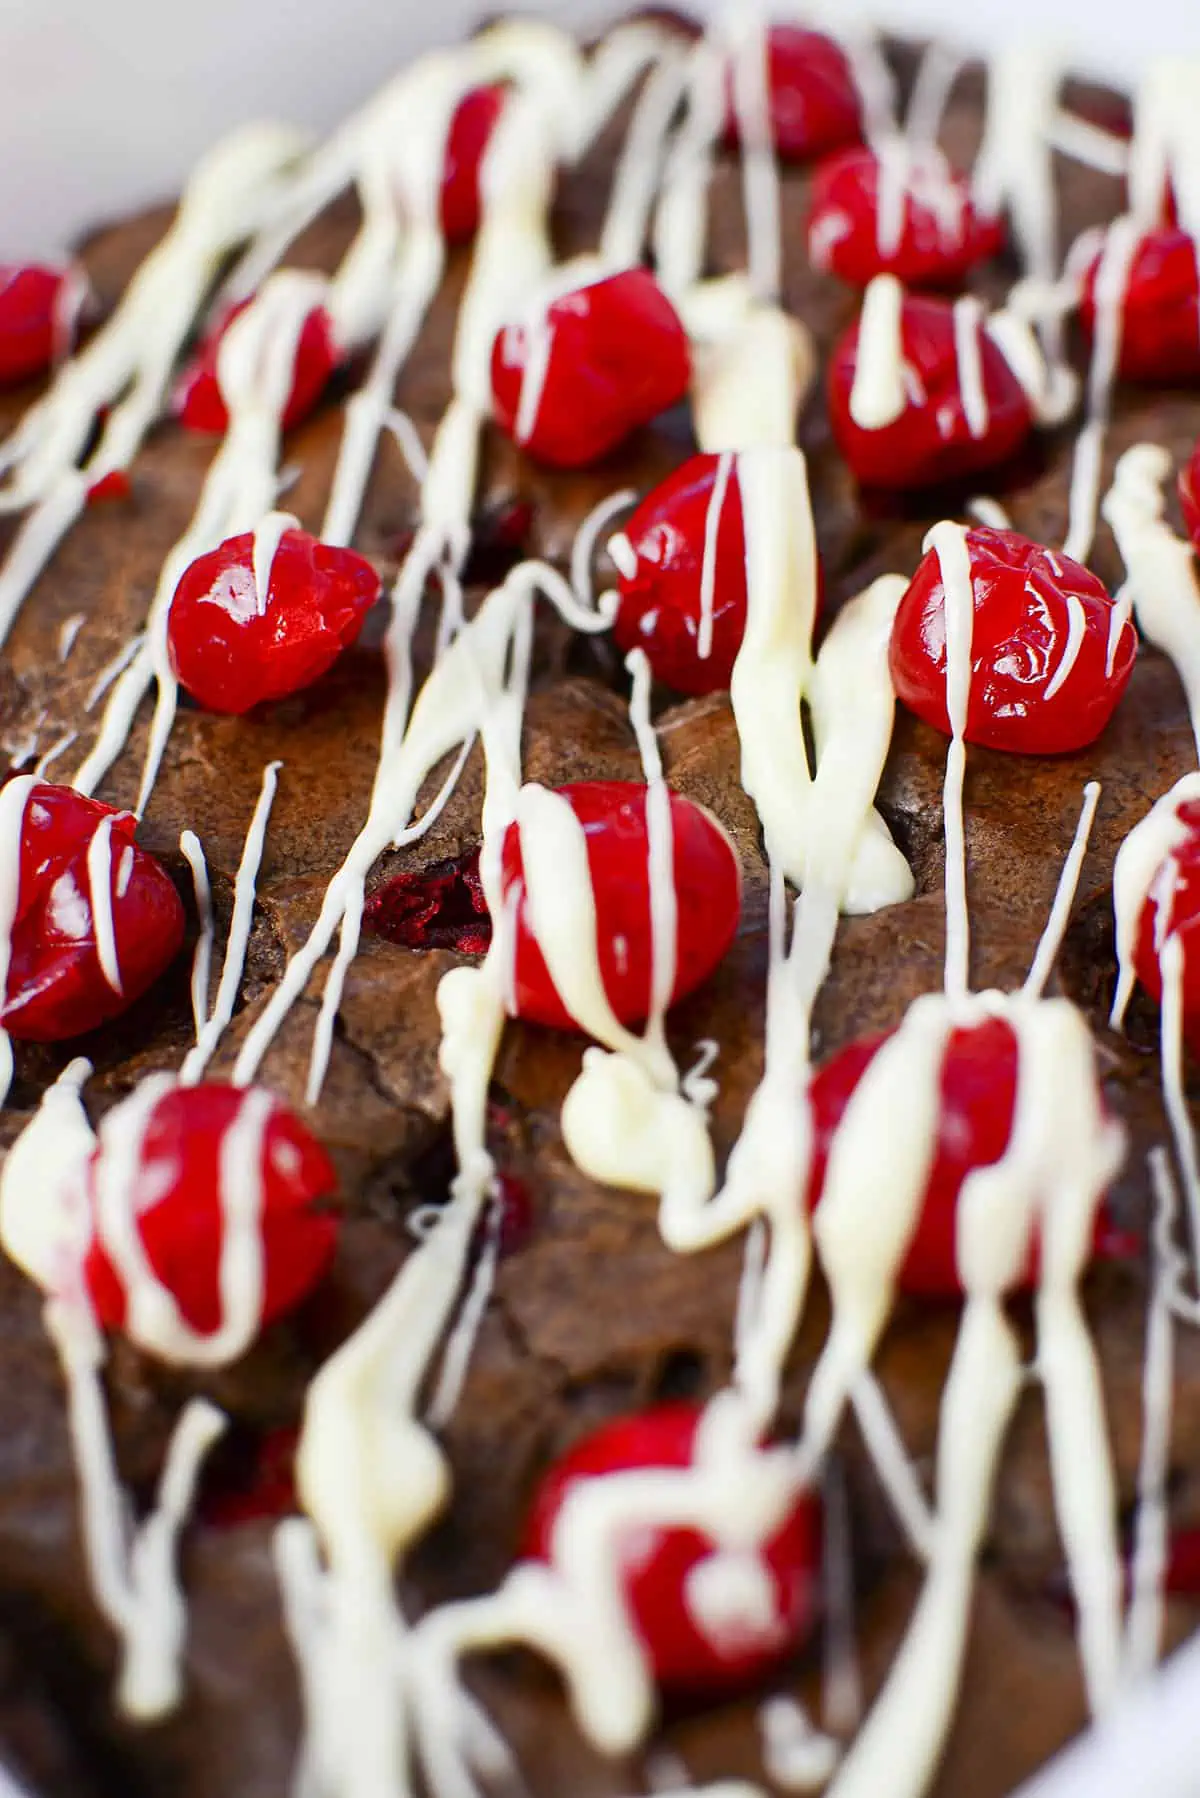 A closeup image of the brownies covered in white choccolate drizzle